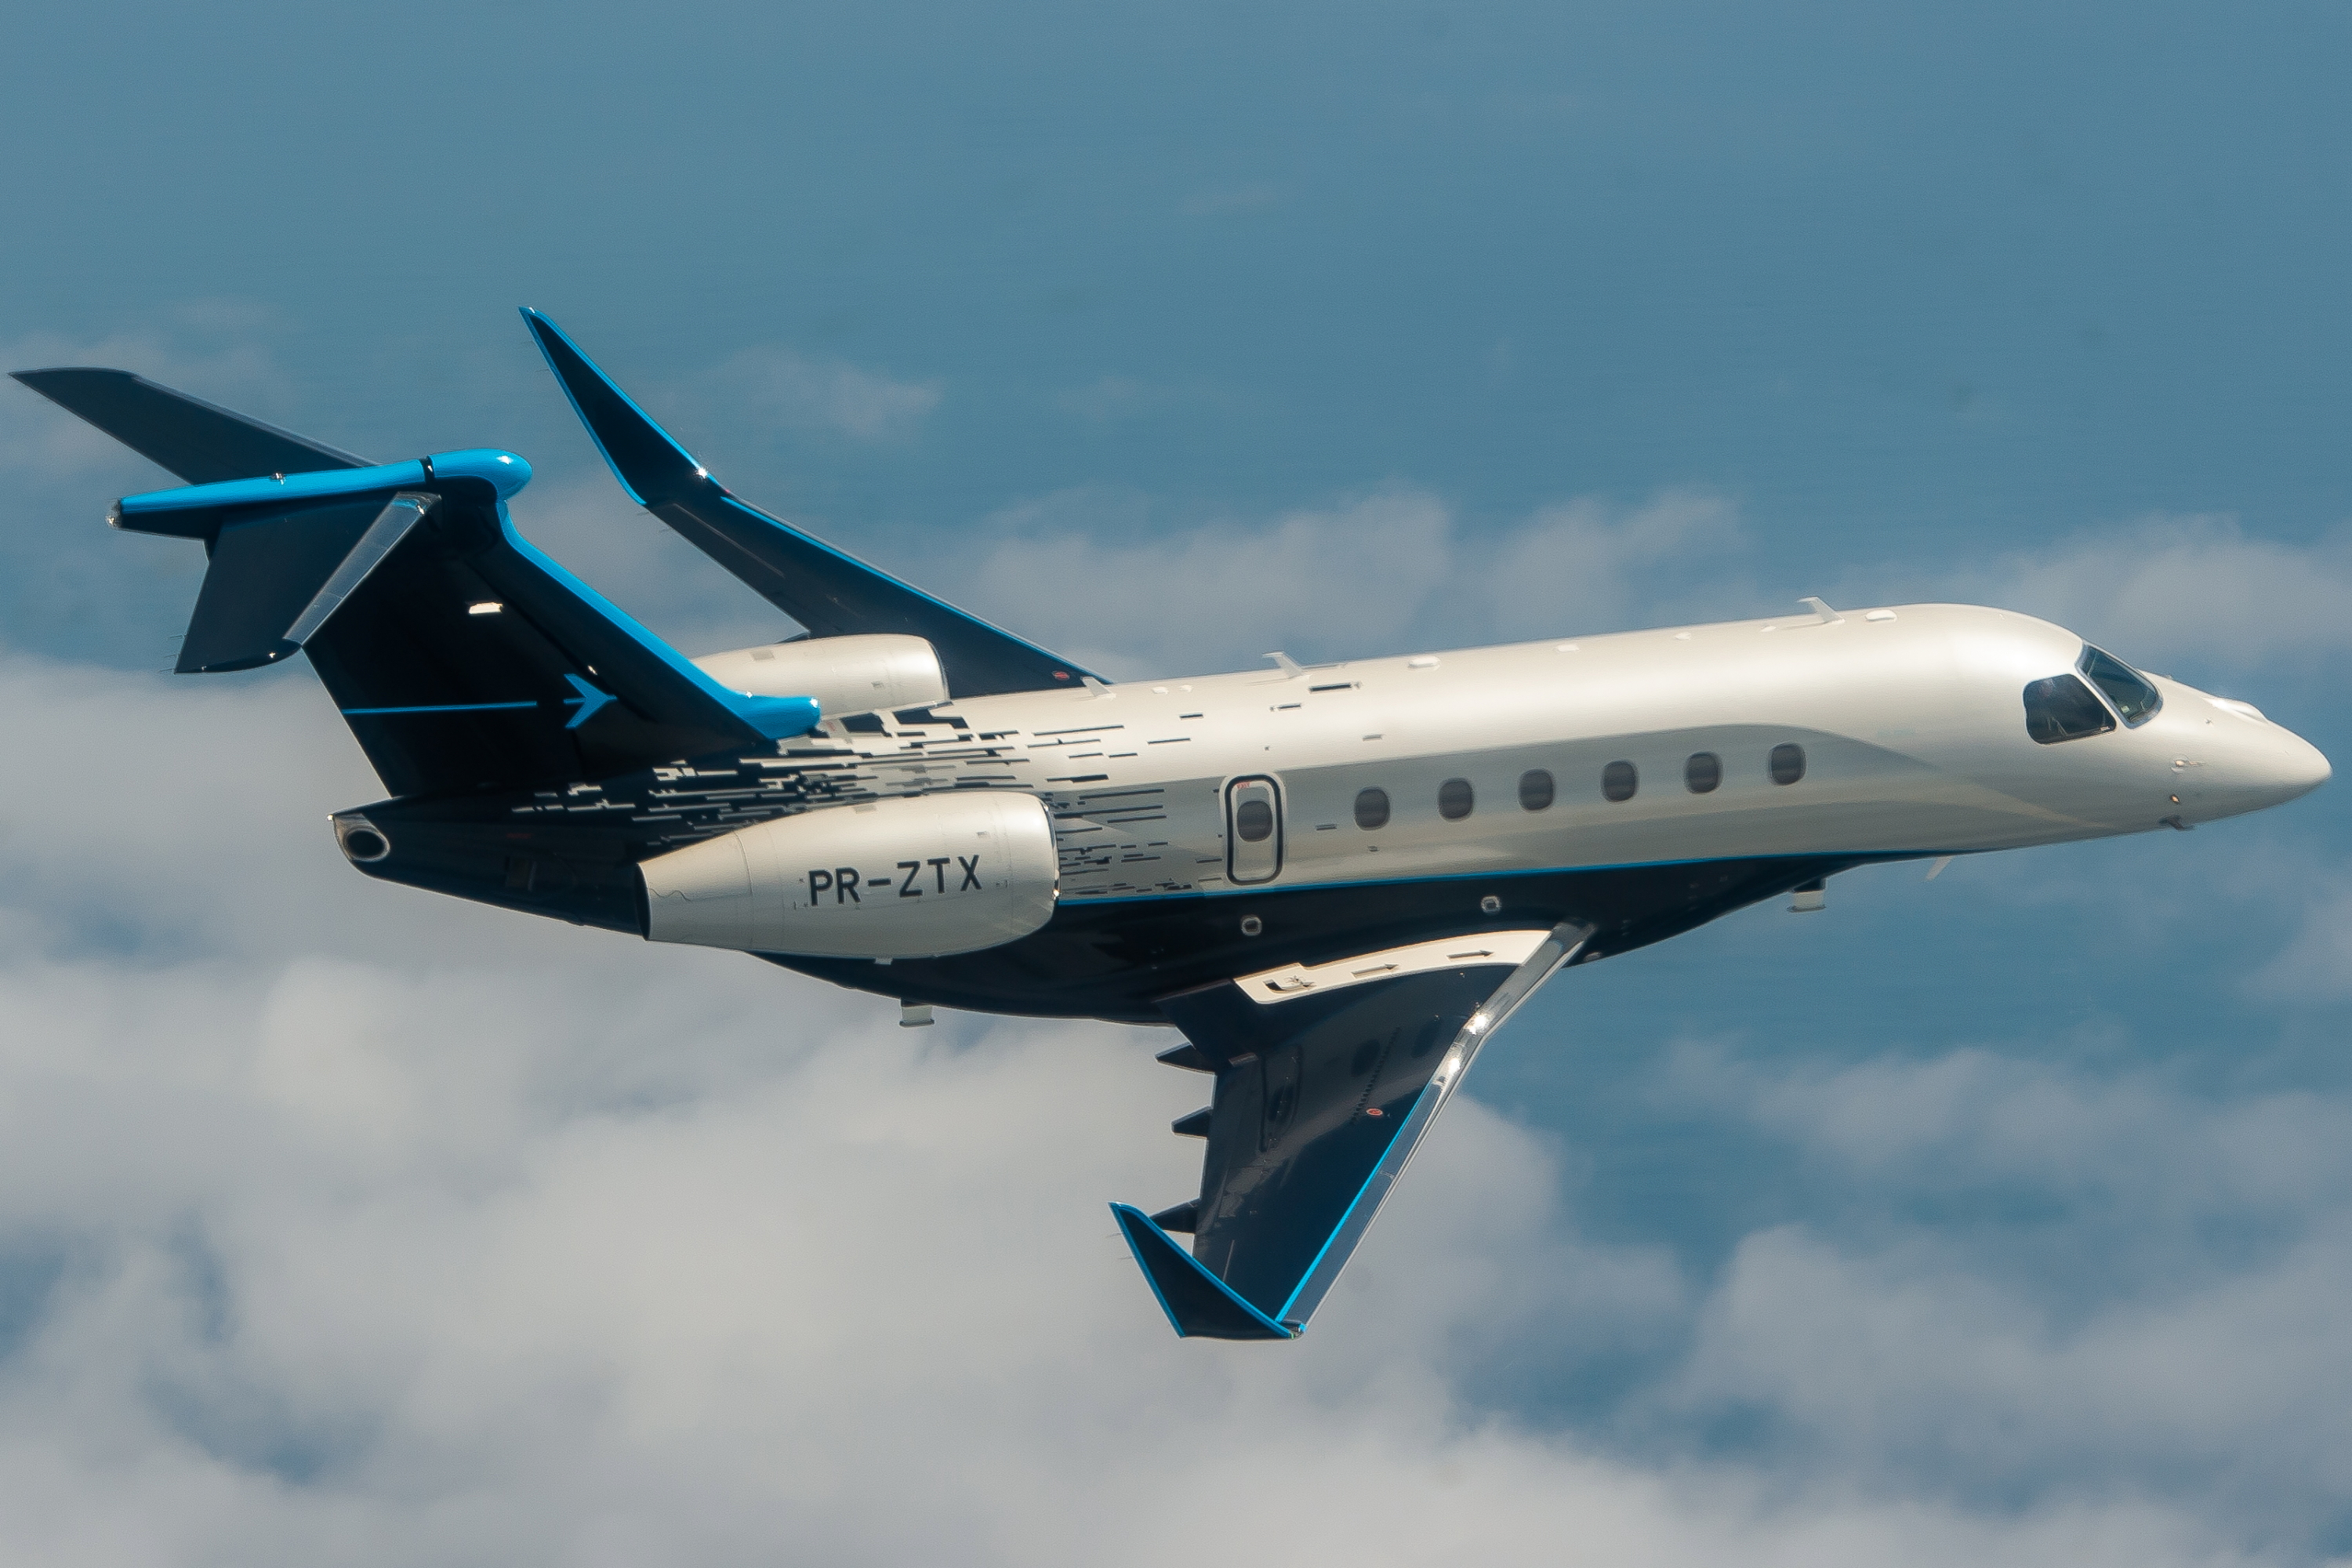 Embraer’s new Praetor 600 business jet has been granted Type Certification by EASA (European Union Aviation Safety Agency) and by the FAA (Federal Aviation Administration). Click to enlarge.